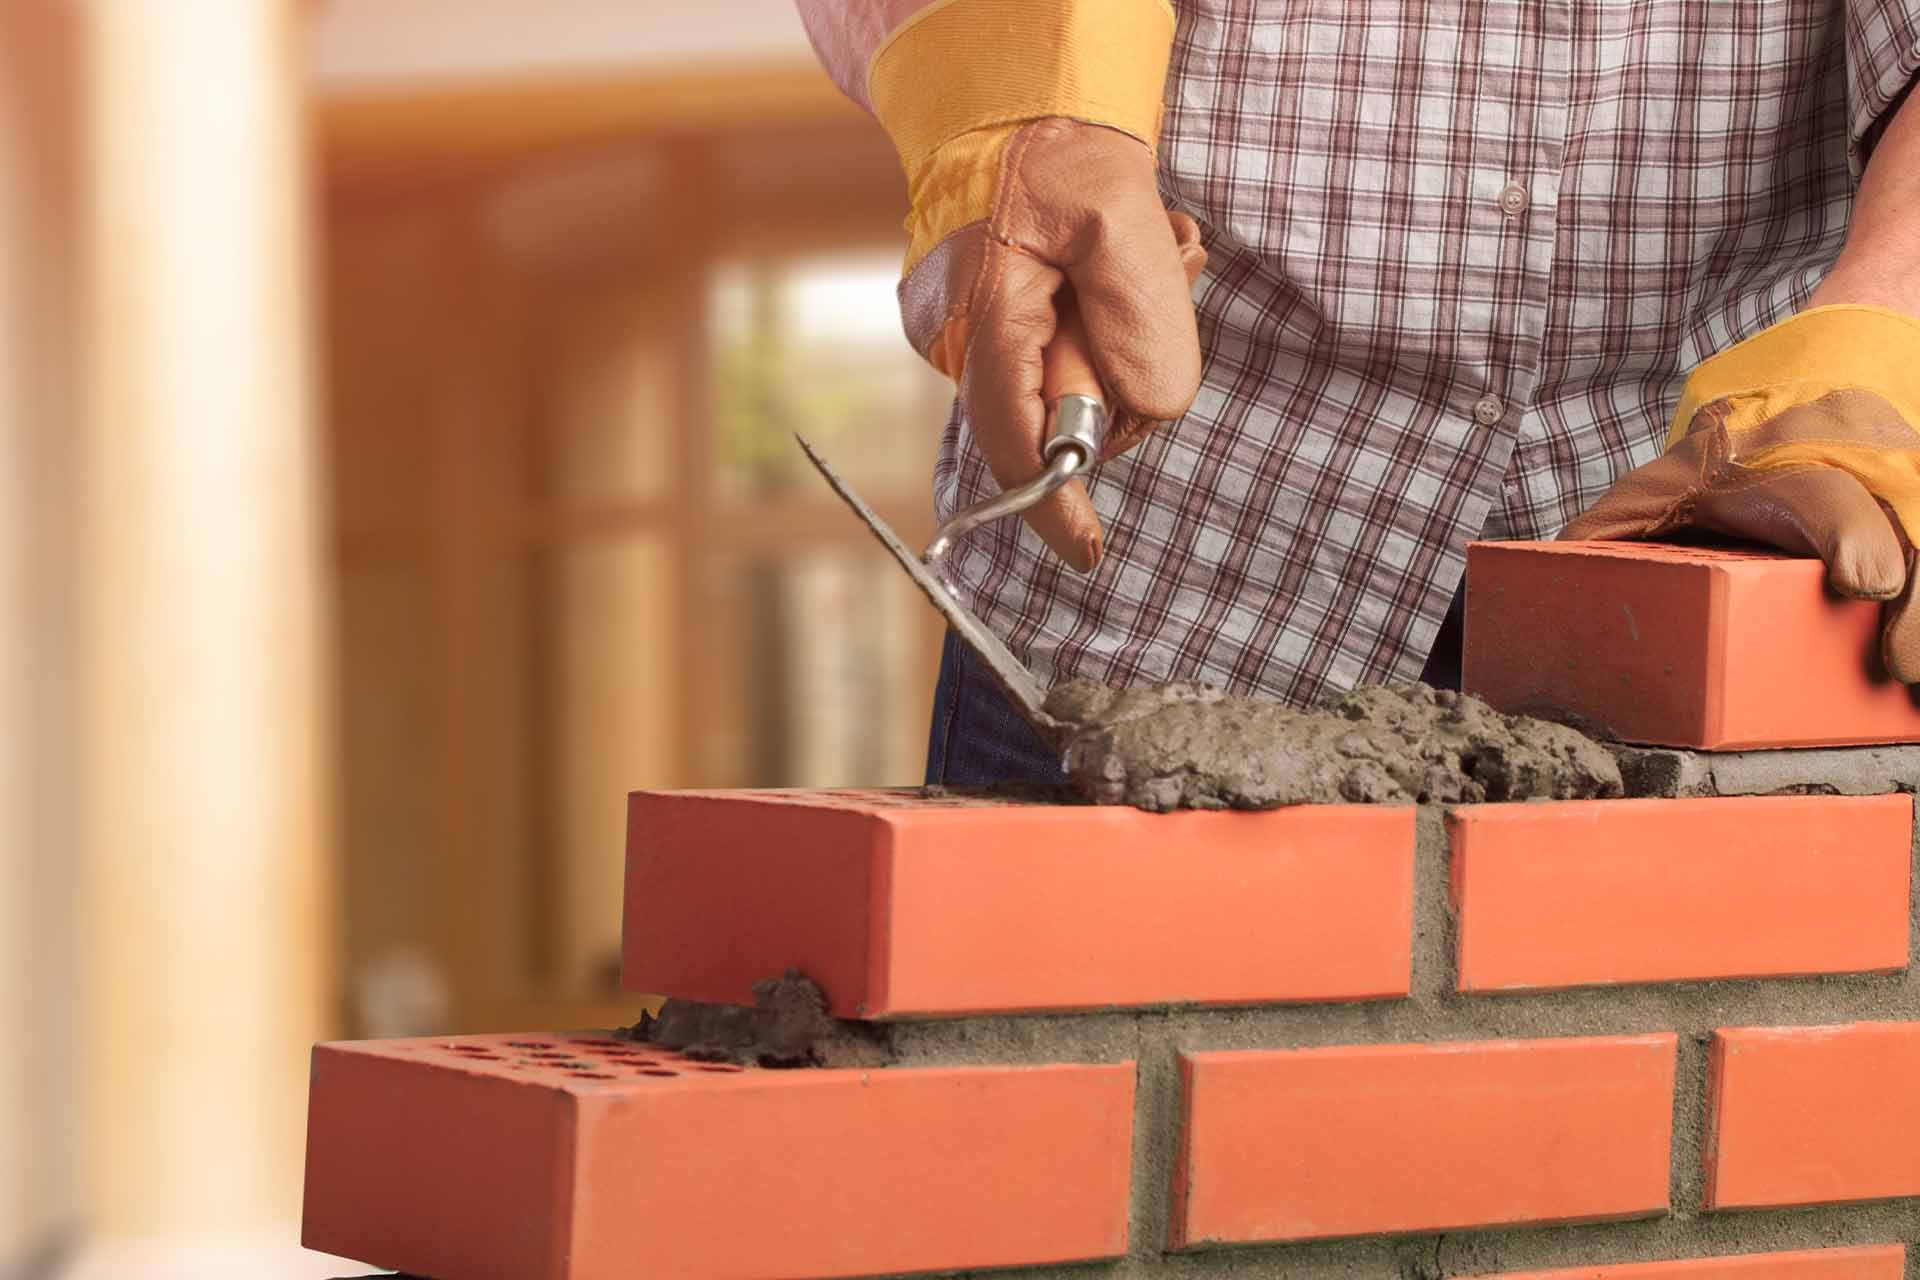 Professional Bricklayers in Clontarf